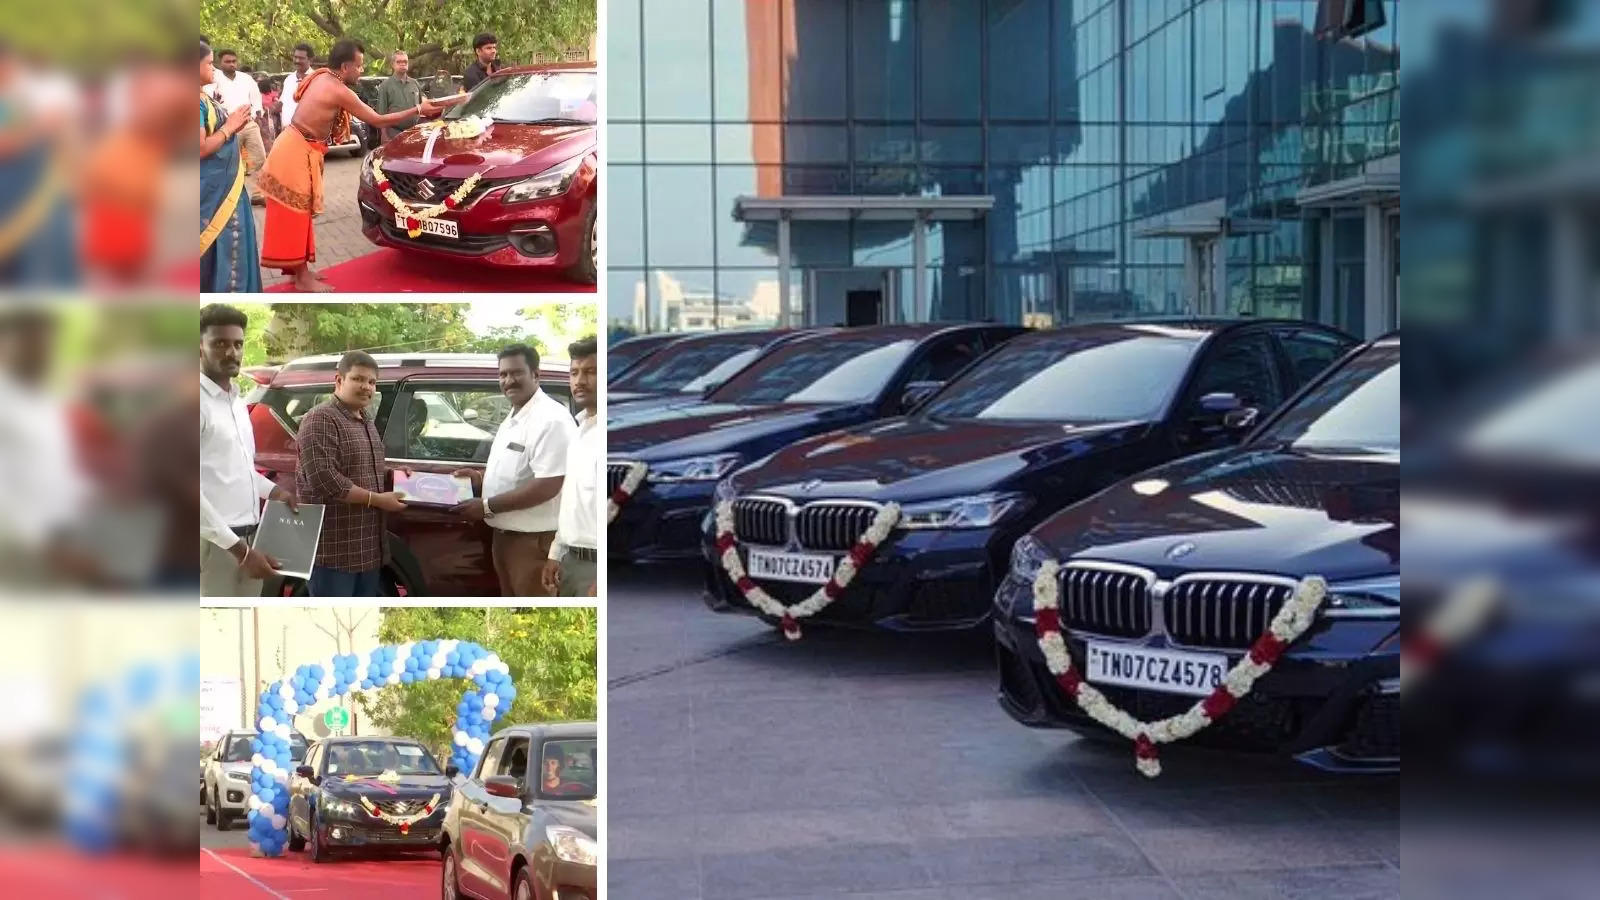 Shiny new Tata SUVs as Diwali gift to employees who don't know how to drive